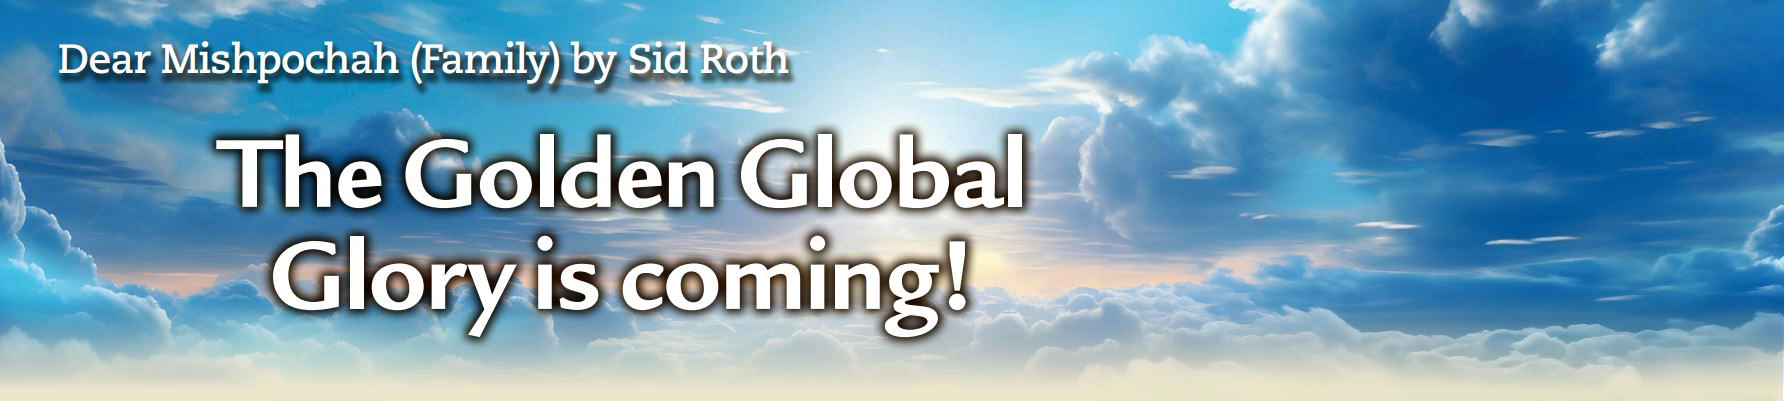 The Golden Global Glory is coming!